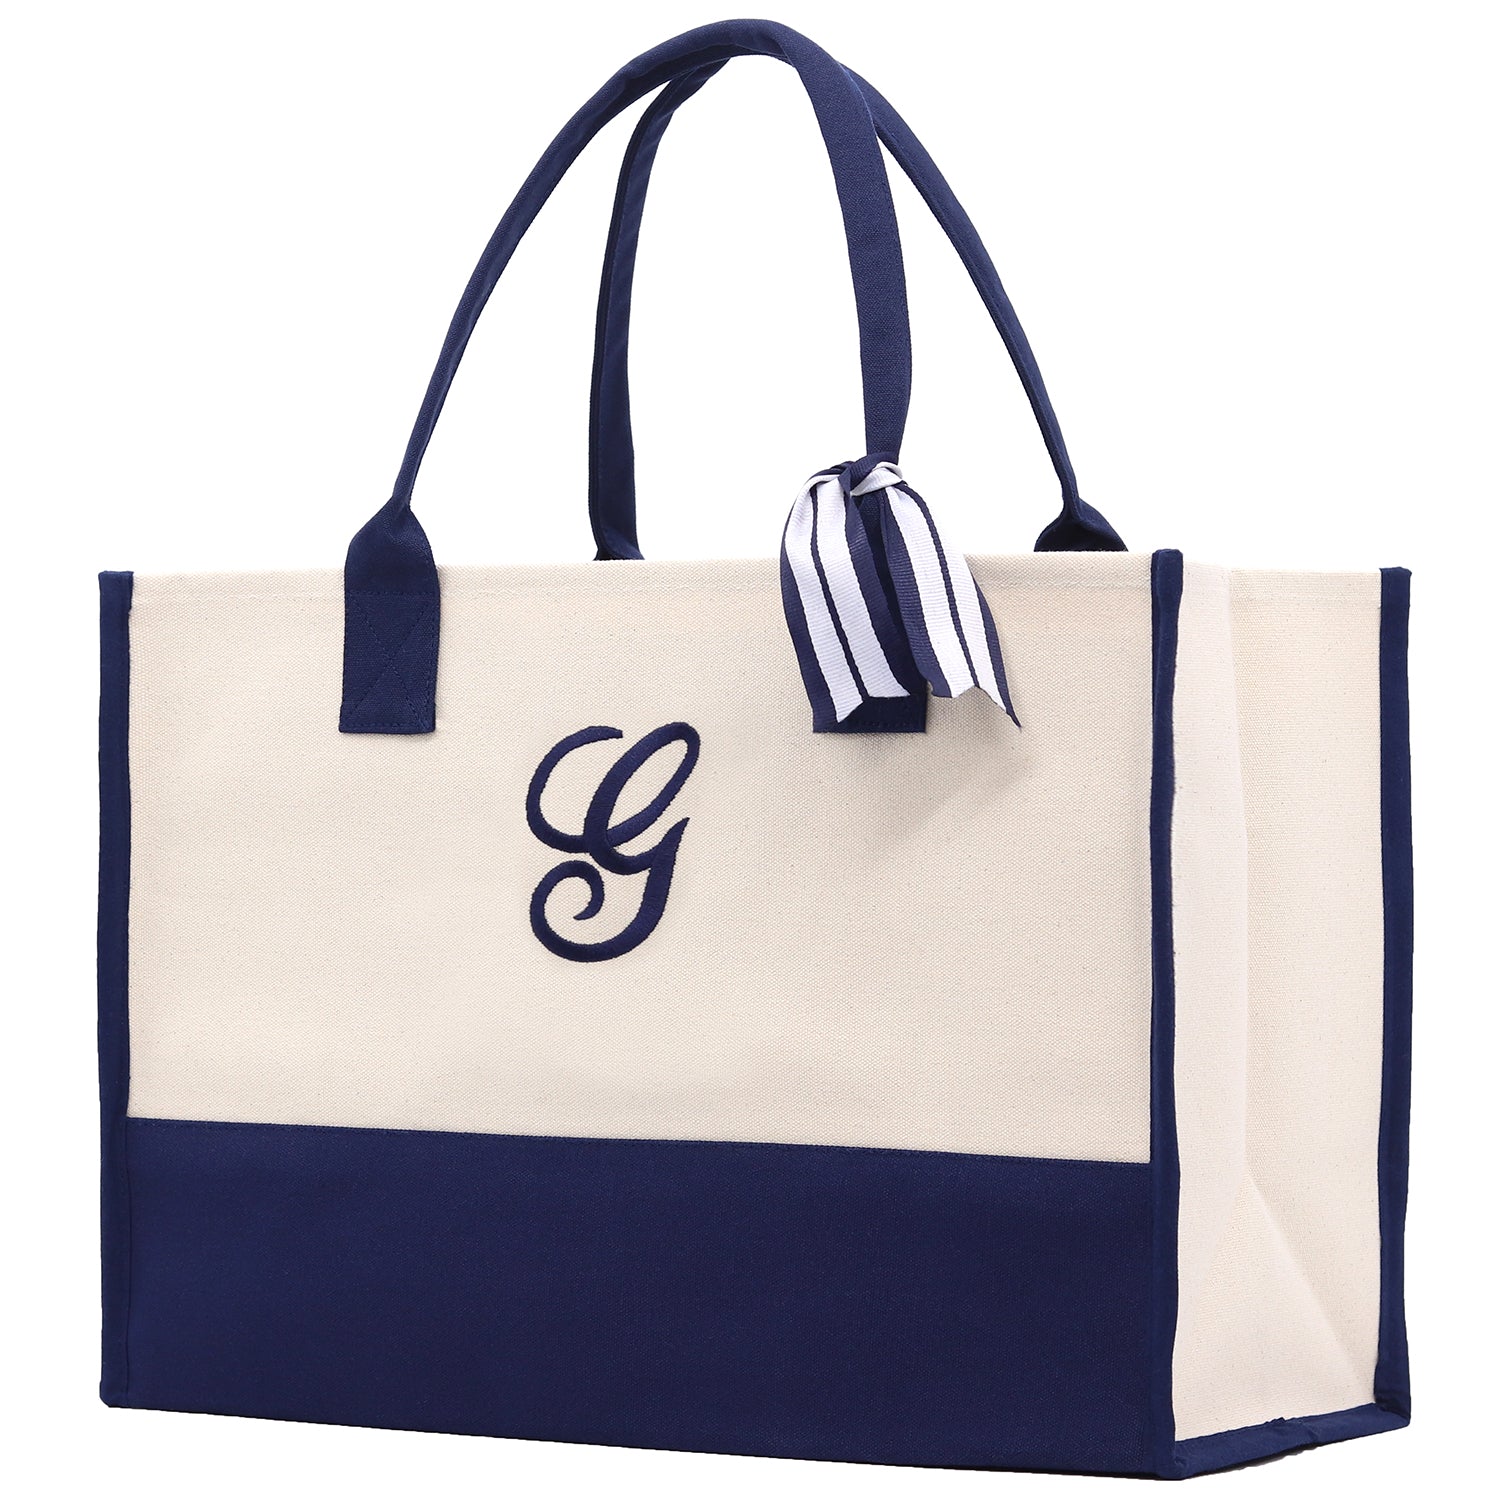 Monogram Tote Bag with 100% Cotton Canvas and a Chic Personalized Monogram Navy Blue Vanessa Rosella Script G 